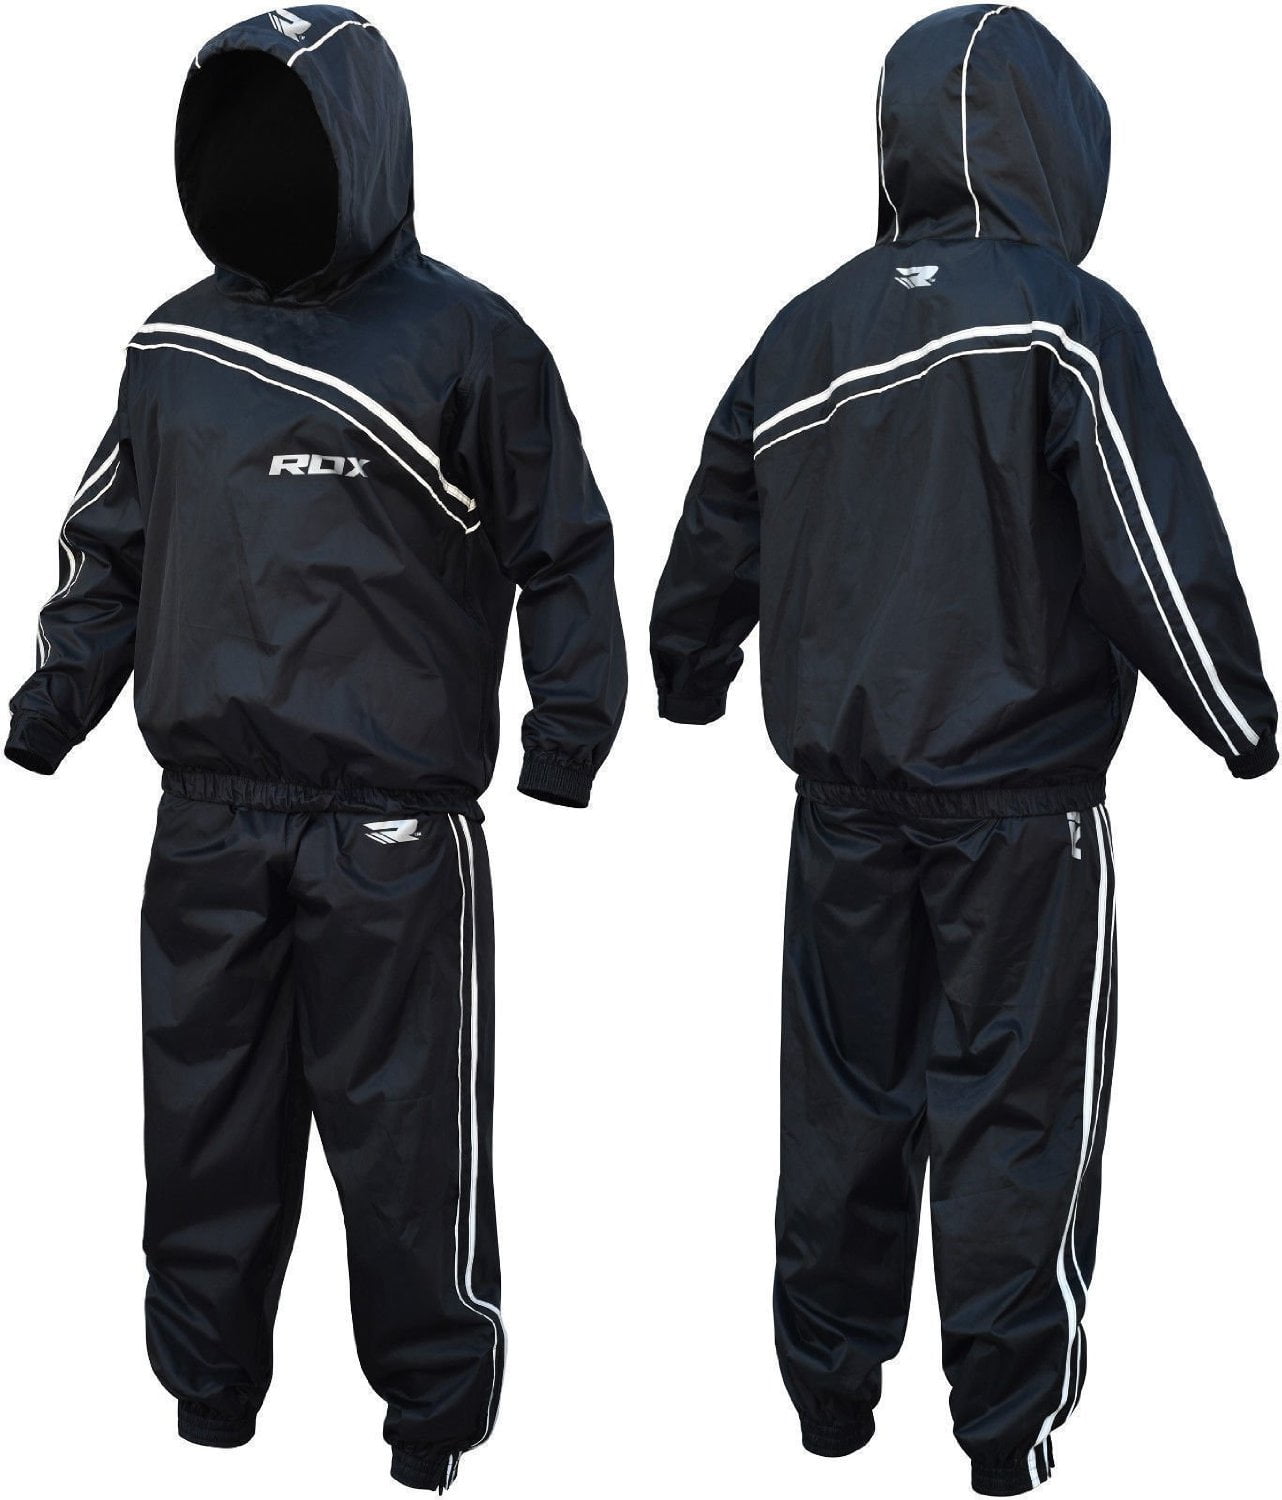 ARD Heavy Duty Sweat Suit Sauna Exercise Gym Suit Excersize Fitness Clothing 